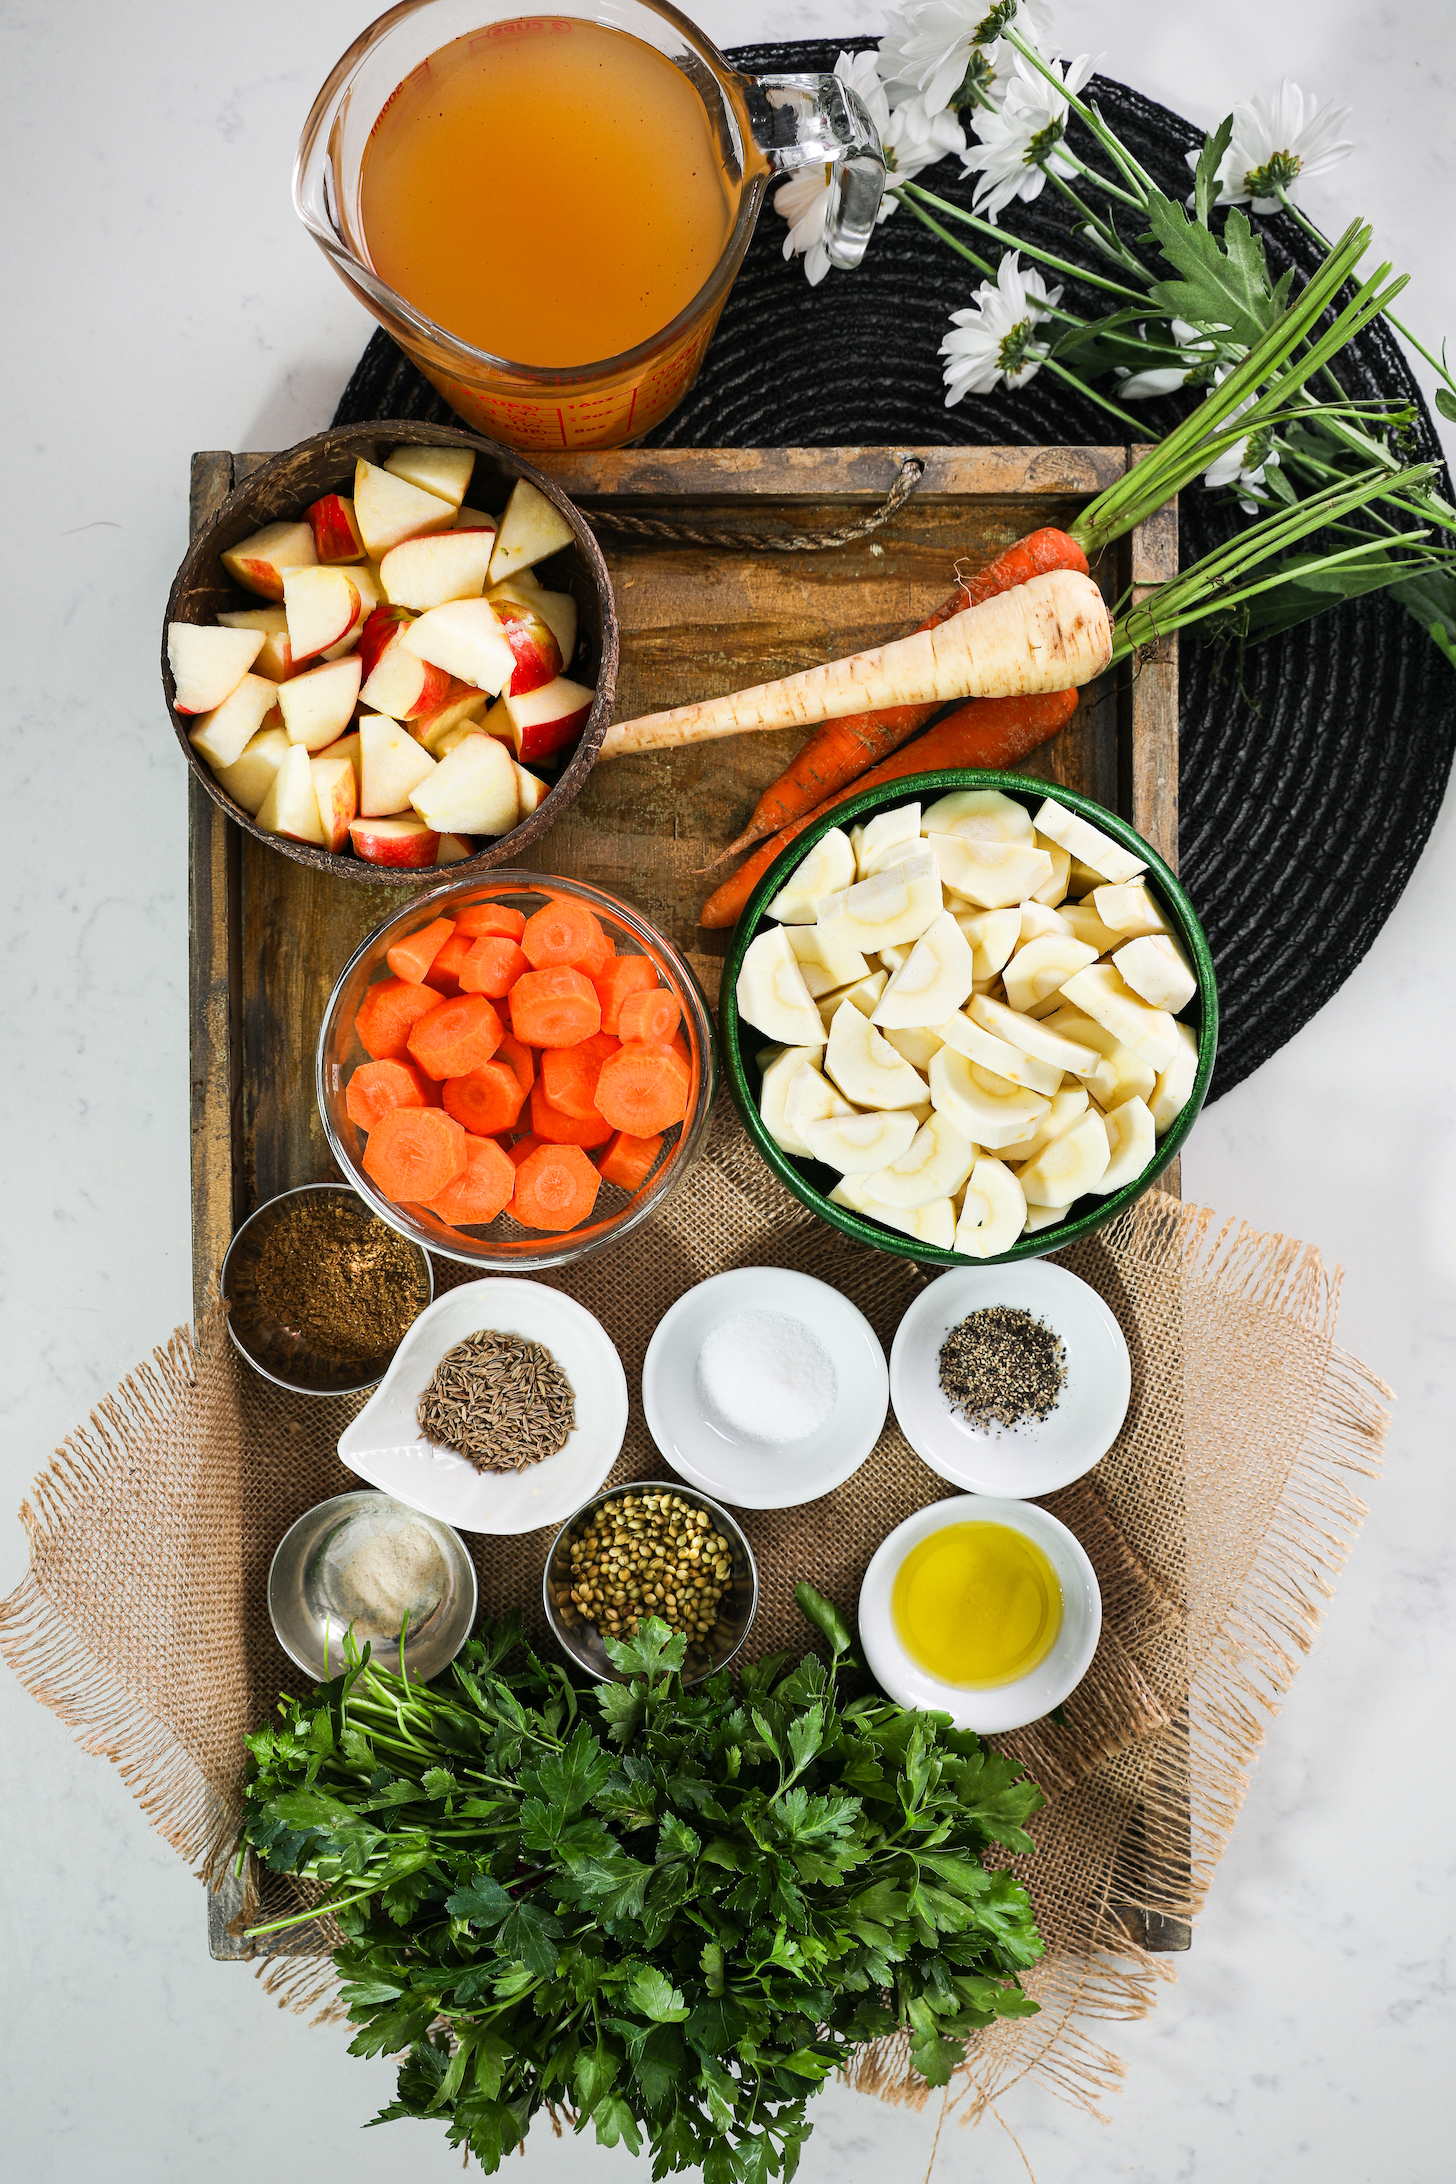 Stylishly arranged diced parsnips, carrots, apples, spices, parsley, and stock seen from above.